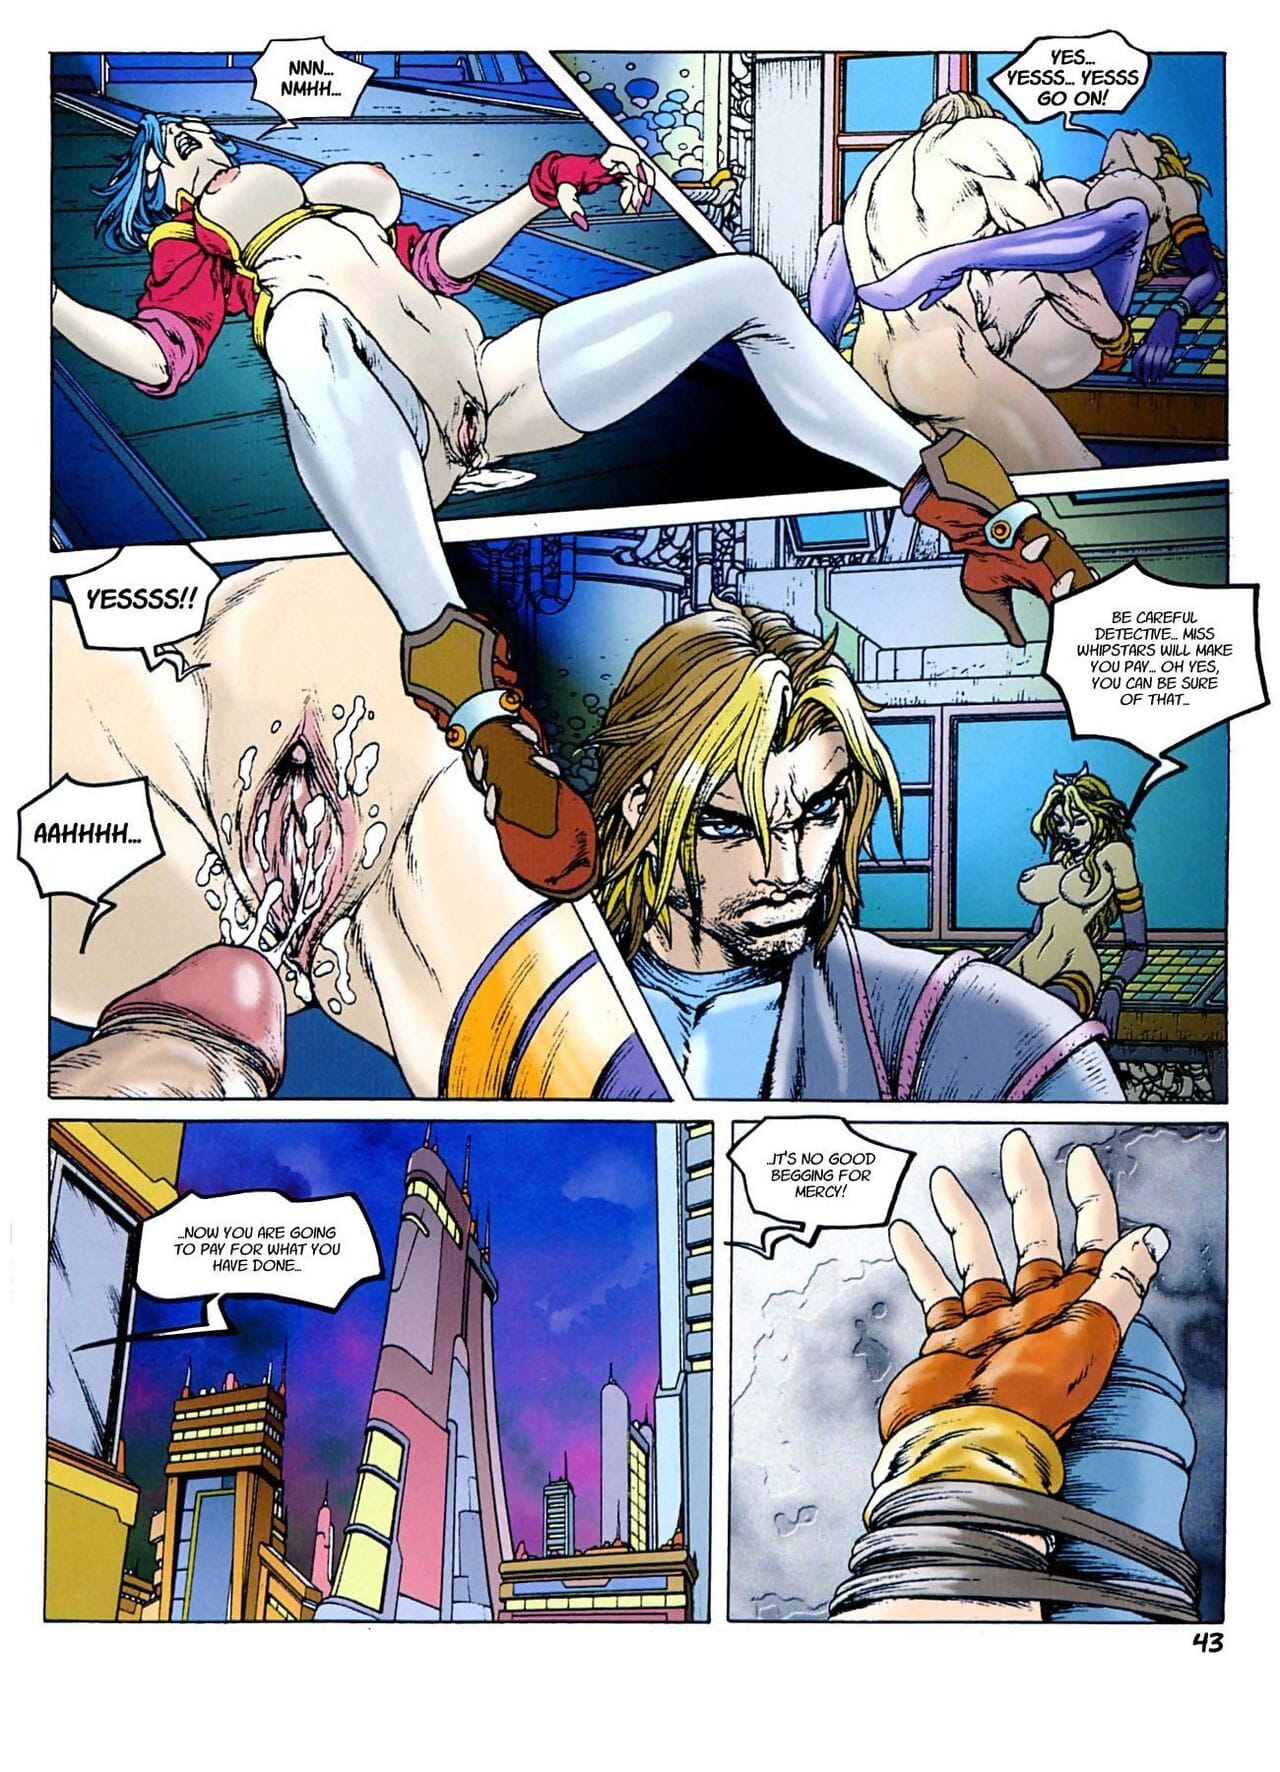 Sexy Cyborg - part 2 page 1